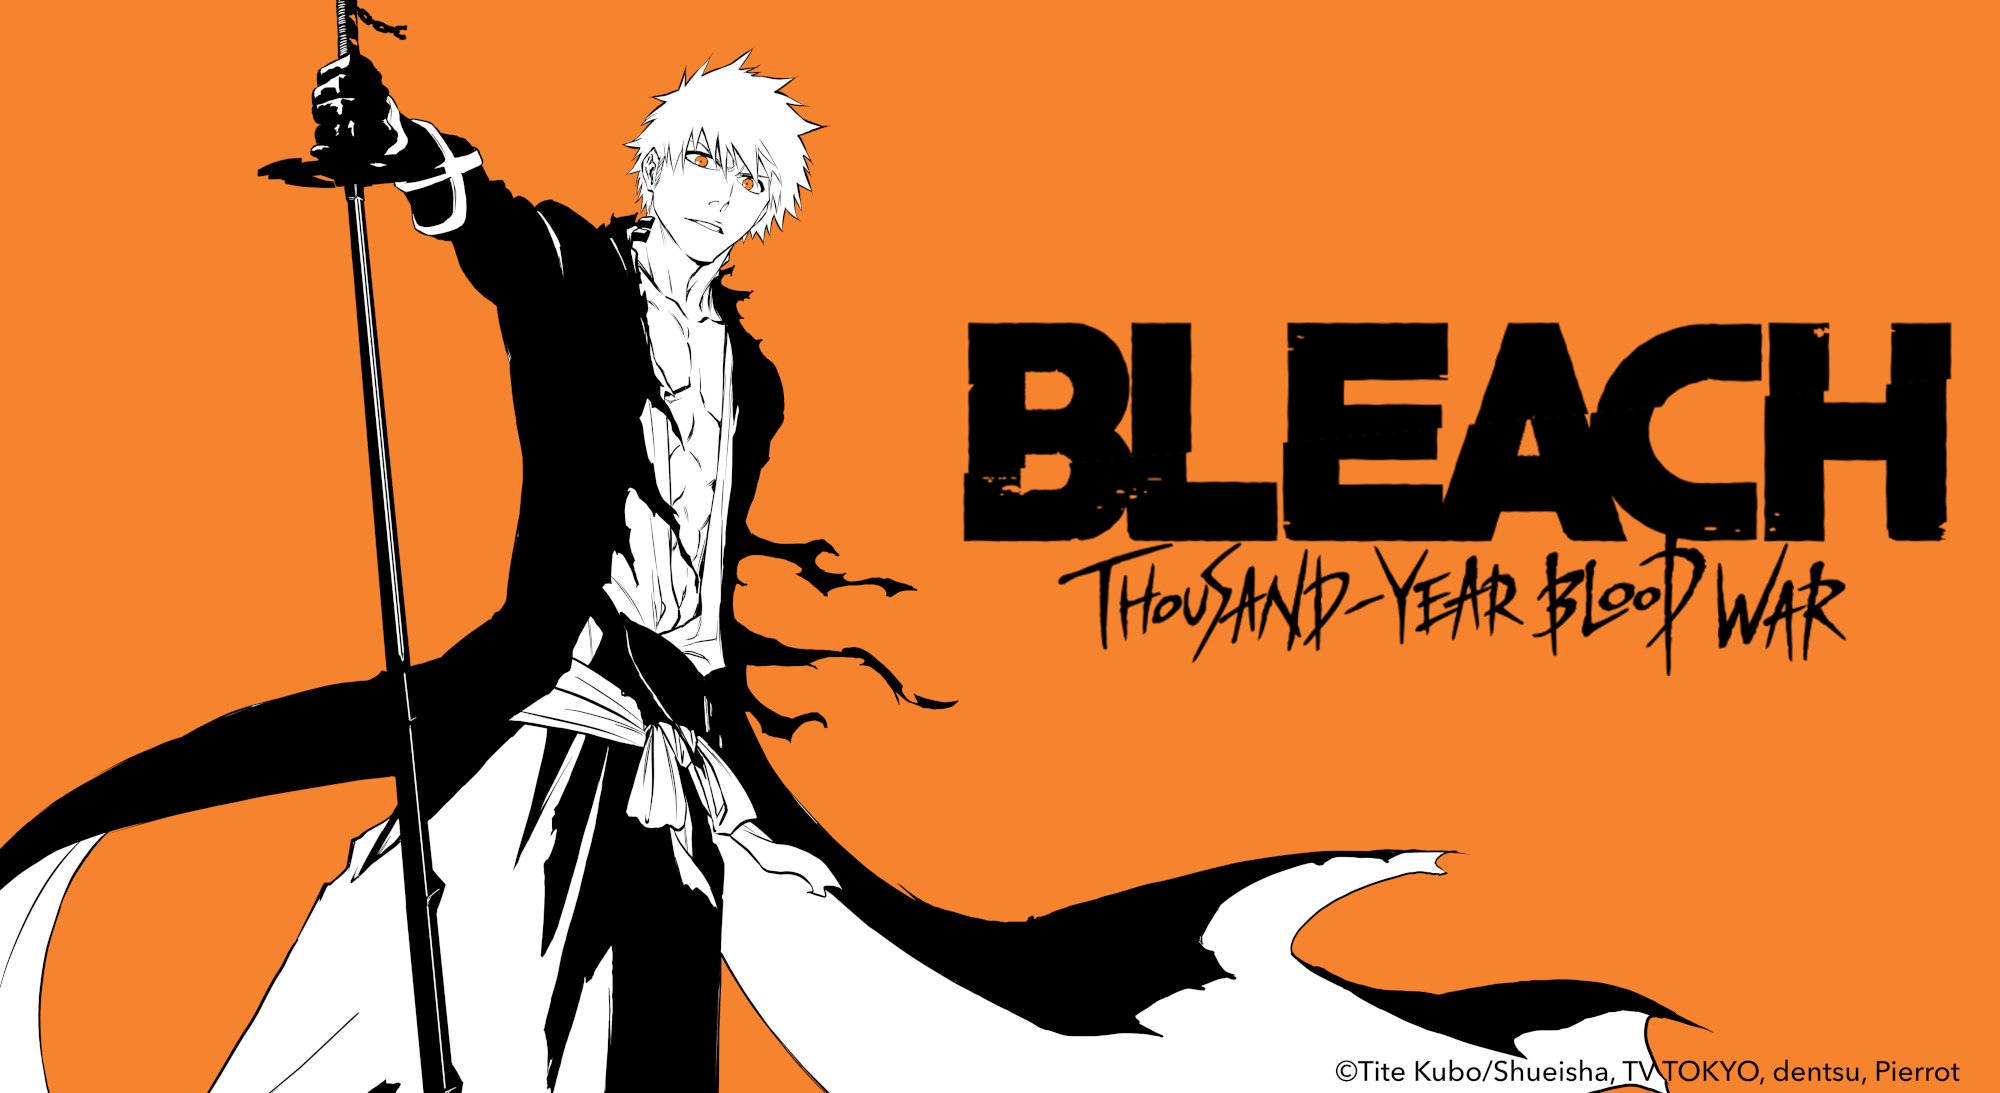 Key art for 'Bleach: Thousand-Year Blood War' for our article about where it is streaming. It features Ichigo Kurosaki wielding his sword and the logo for the anime's final arc against an orange background.